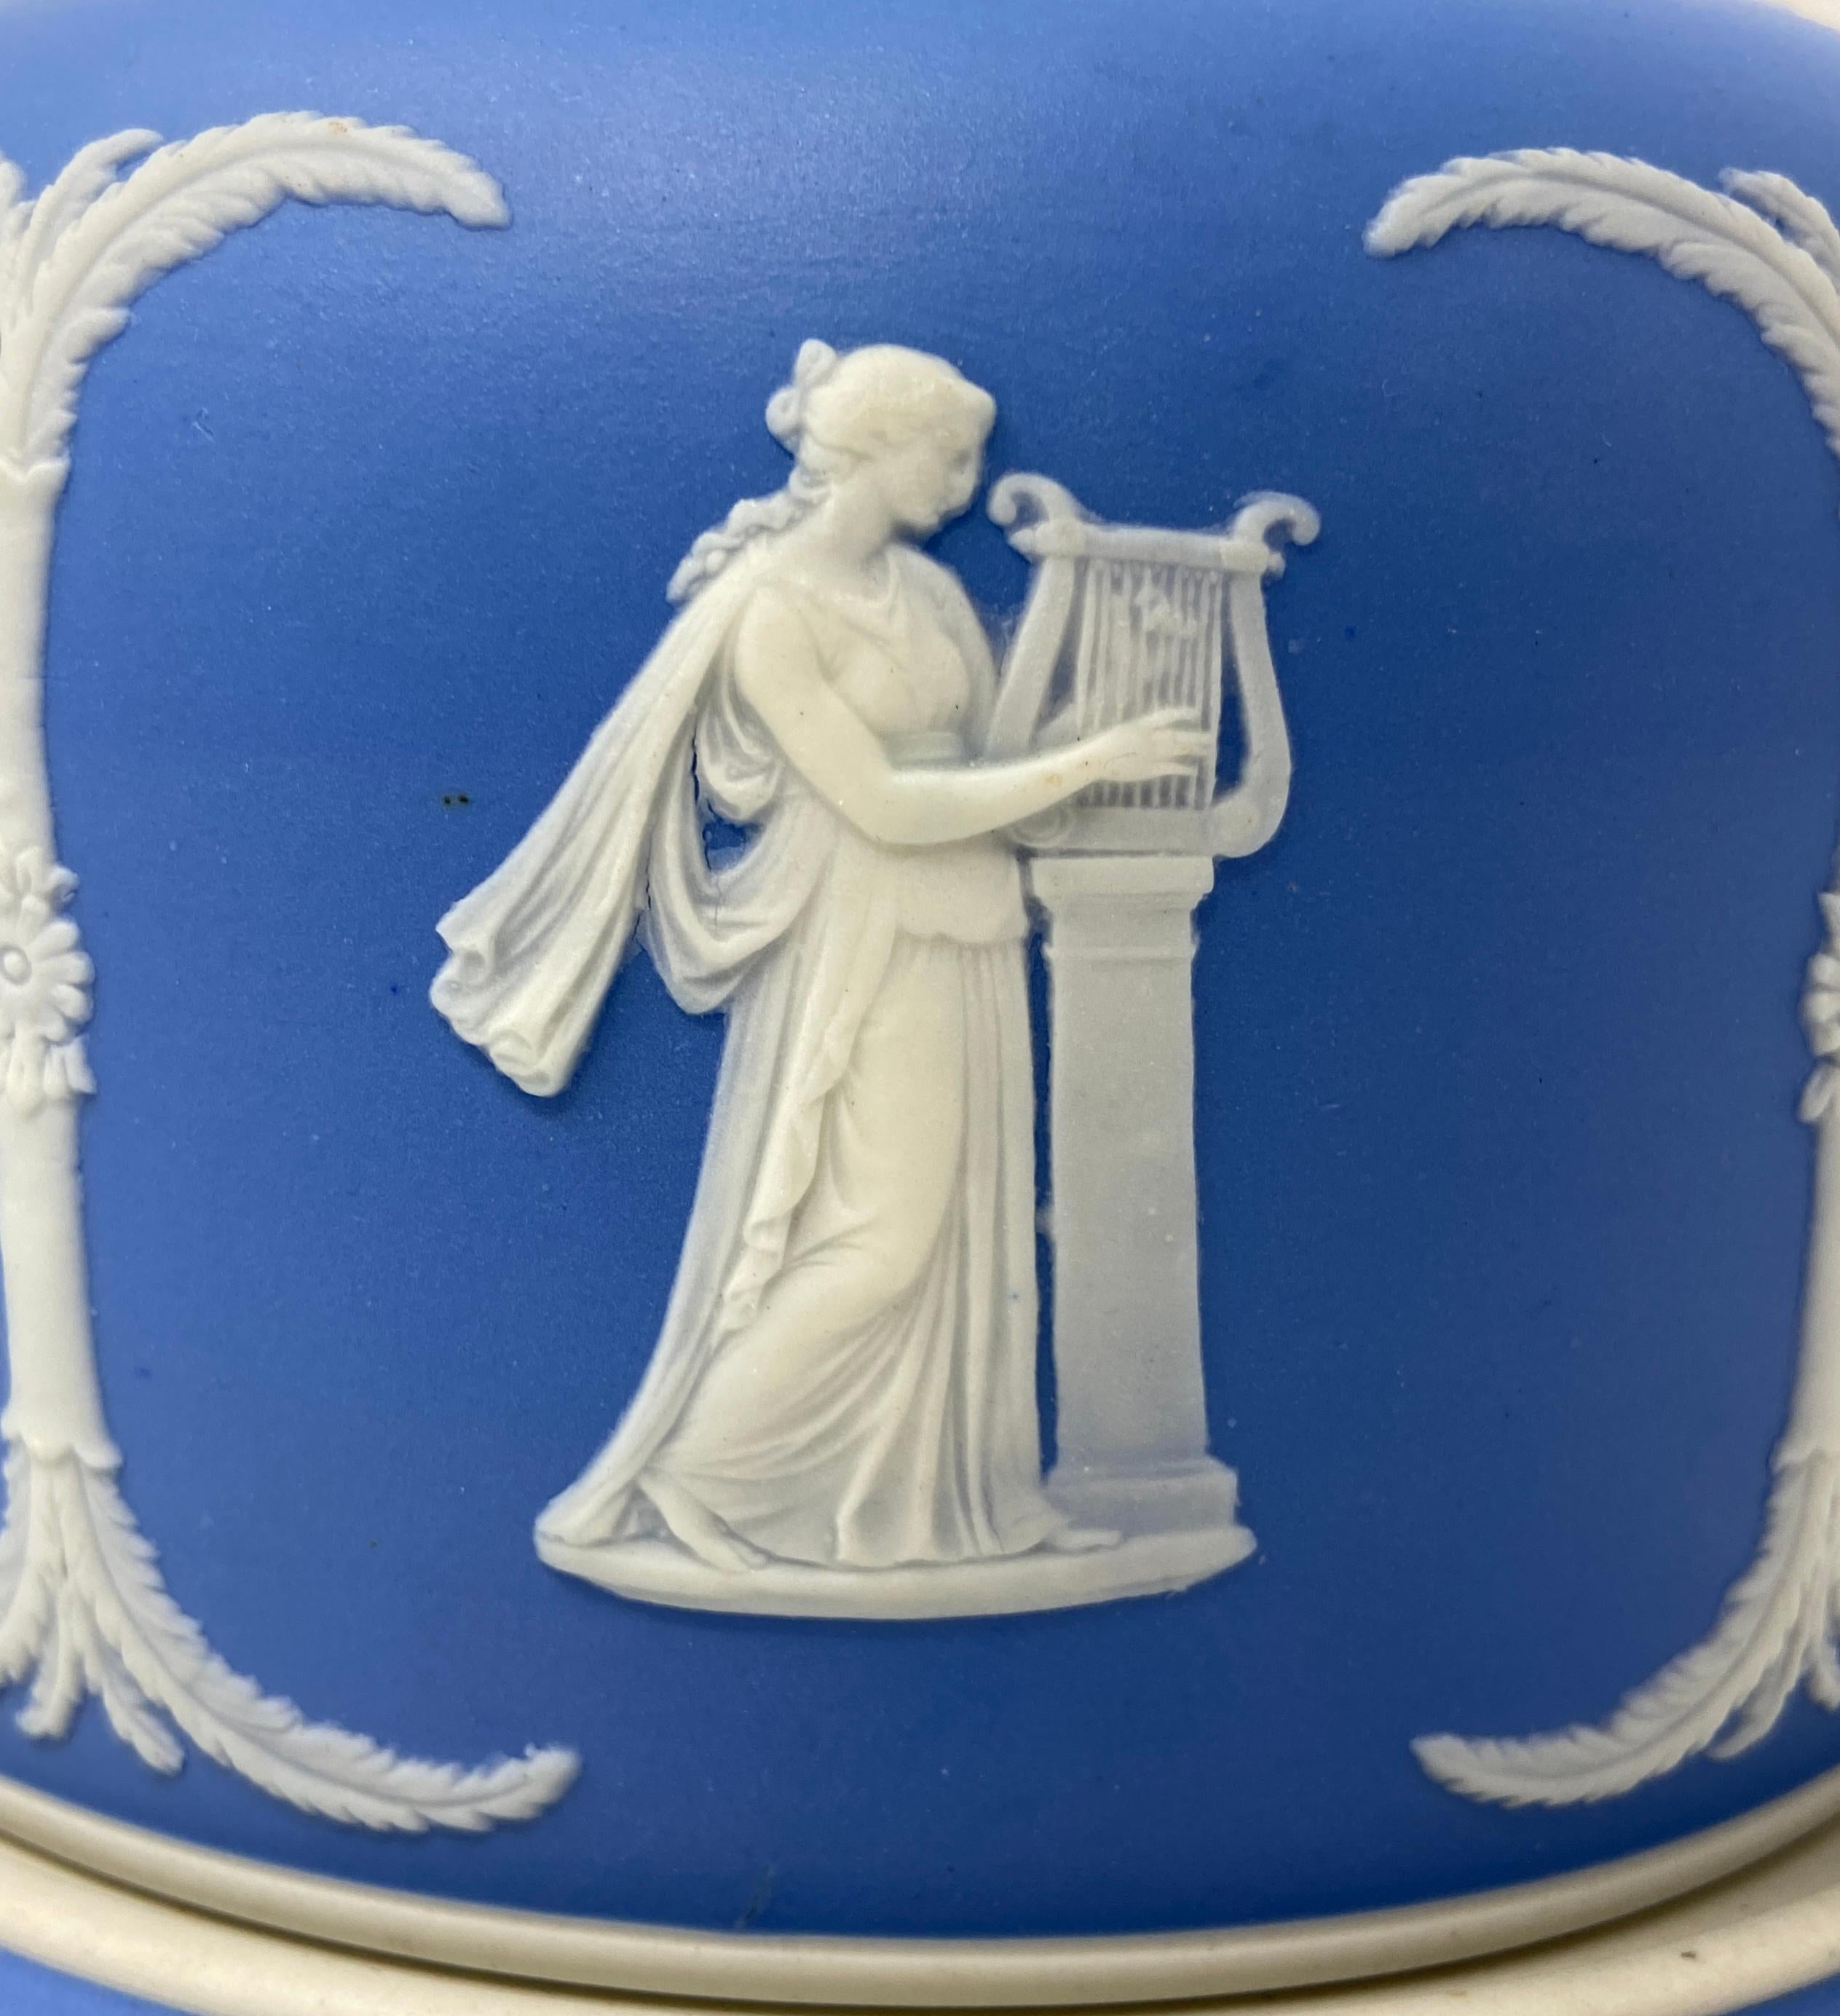 Antique English Wedgwood Blue & White Porcelain Cheese Dish and Cover Circa 1900 2